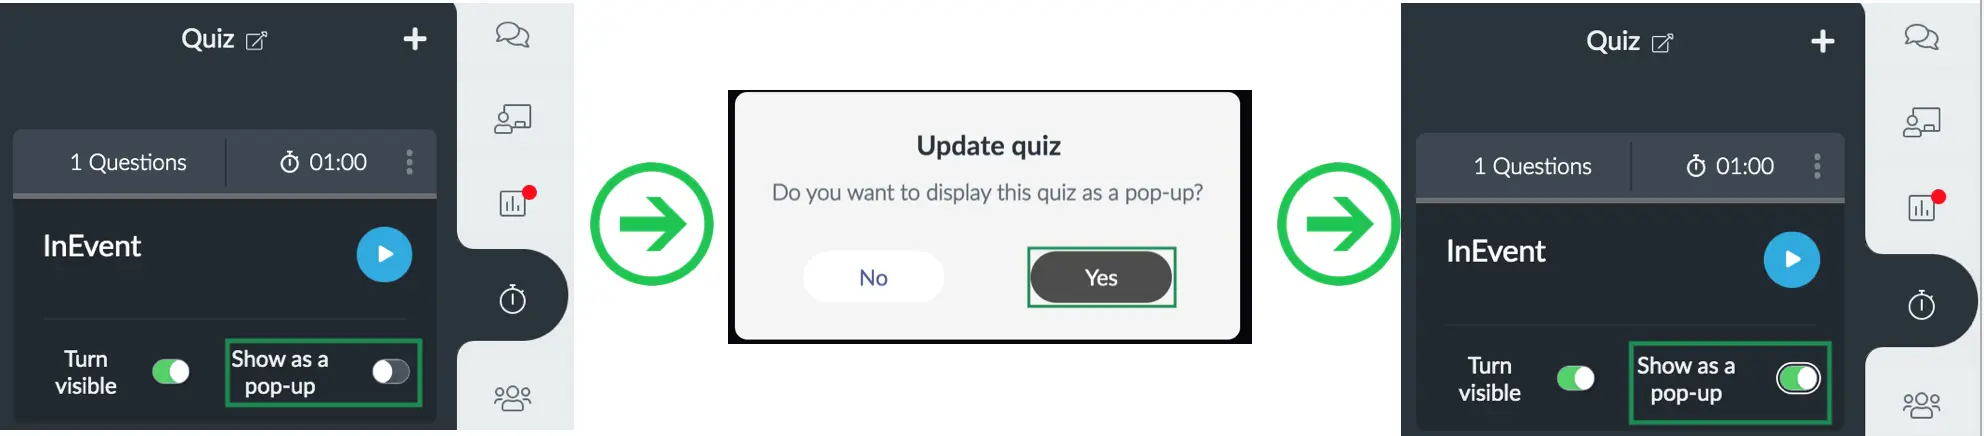 Images showing the steps to enabling quiz to show as pop up